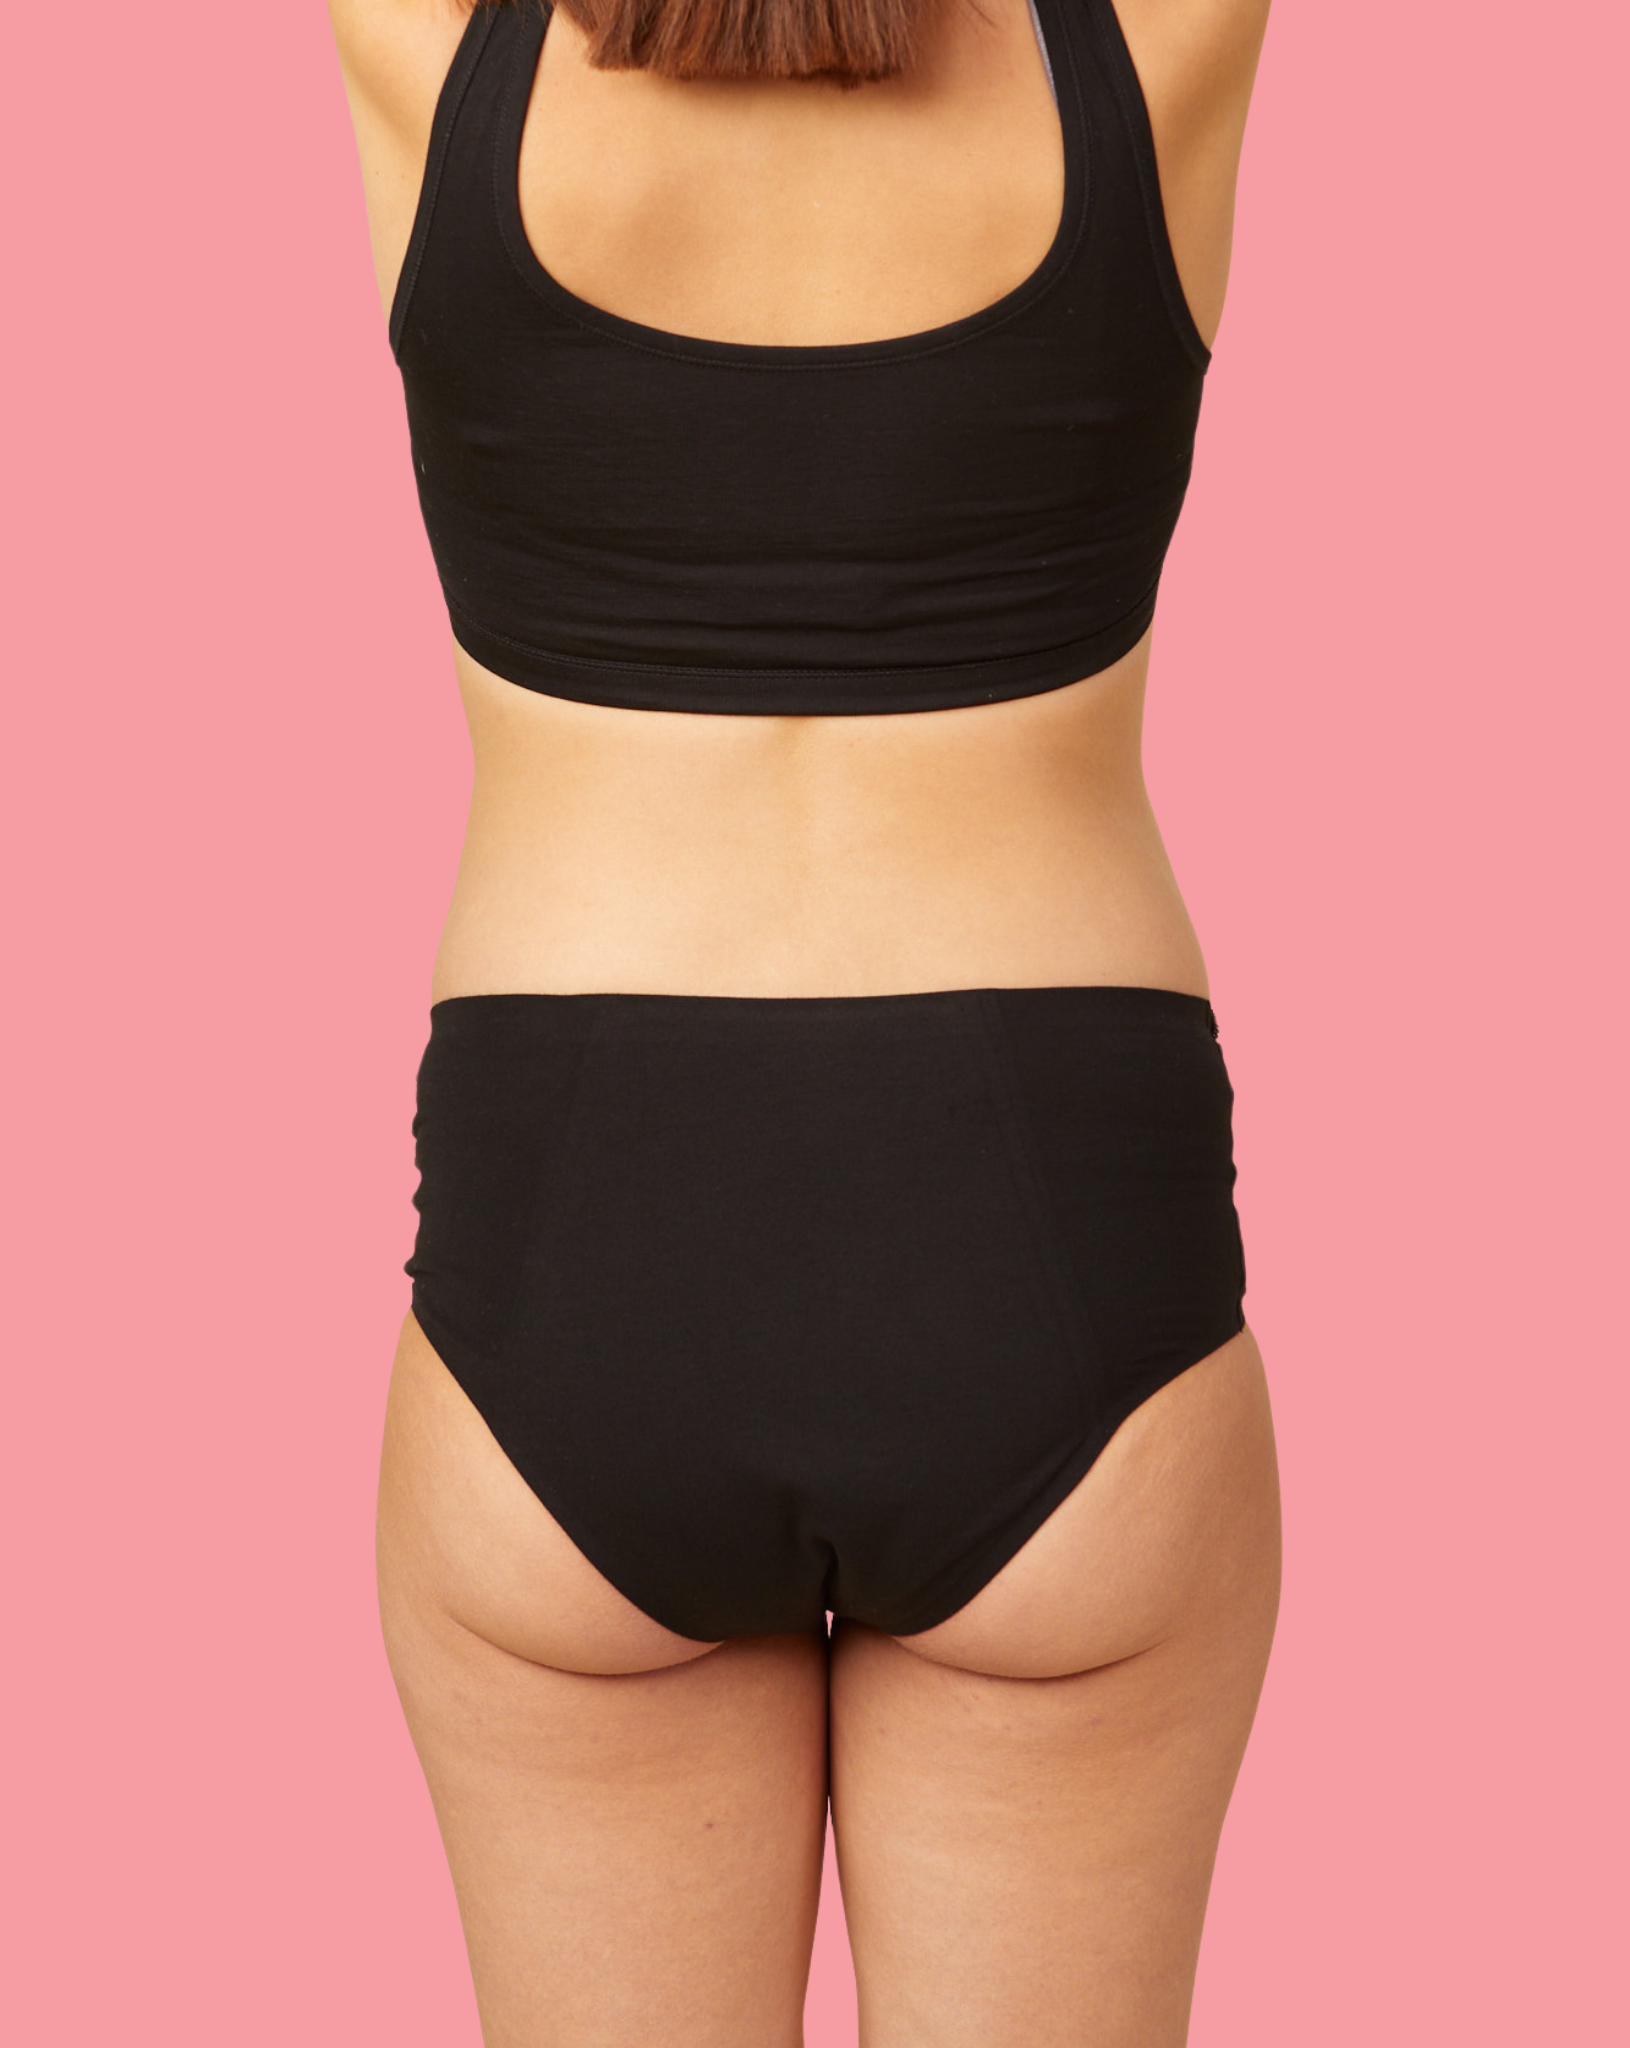 dais maternity absorbent and washable underwear from the back modelled on a pregnant woman.